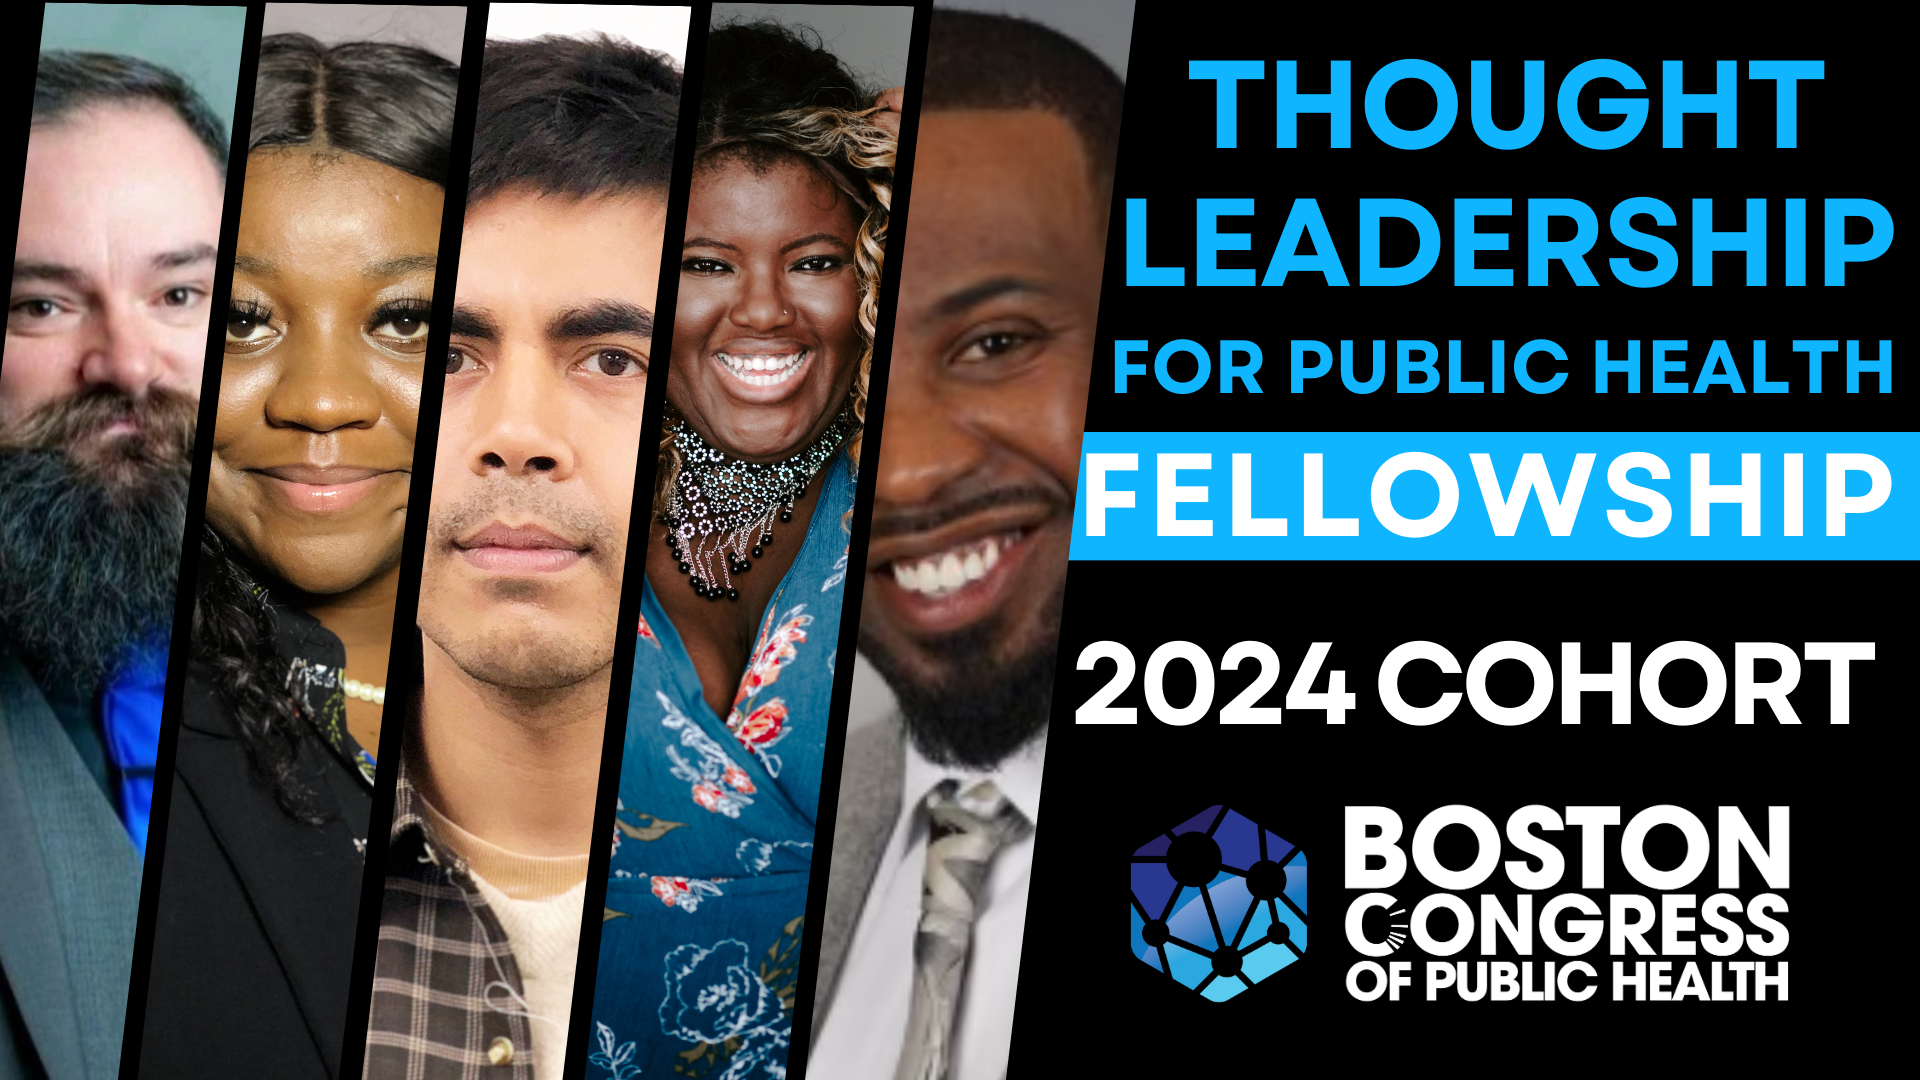 https://bcph.org/thought-leaders-fellowship-2024-cohort/